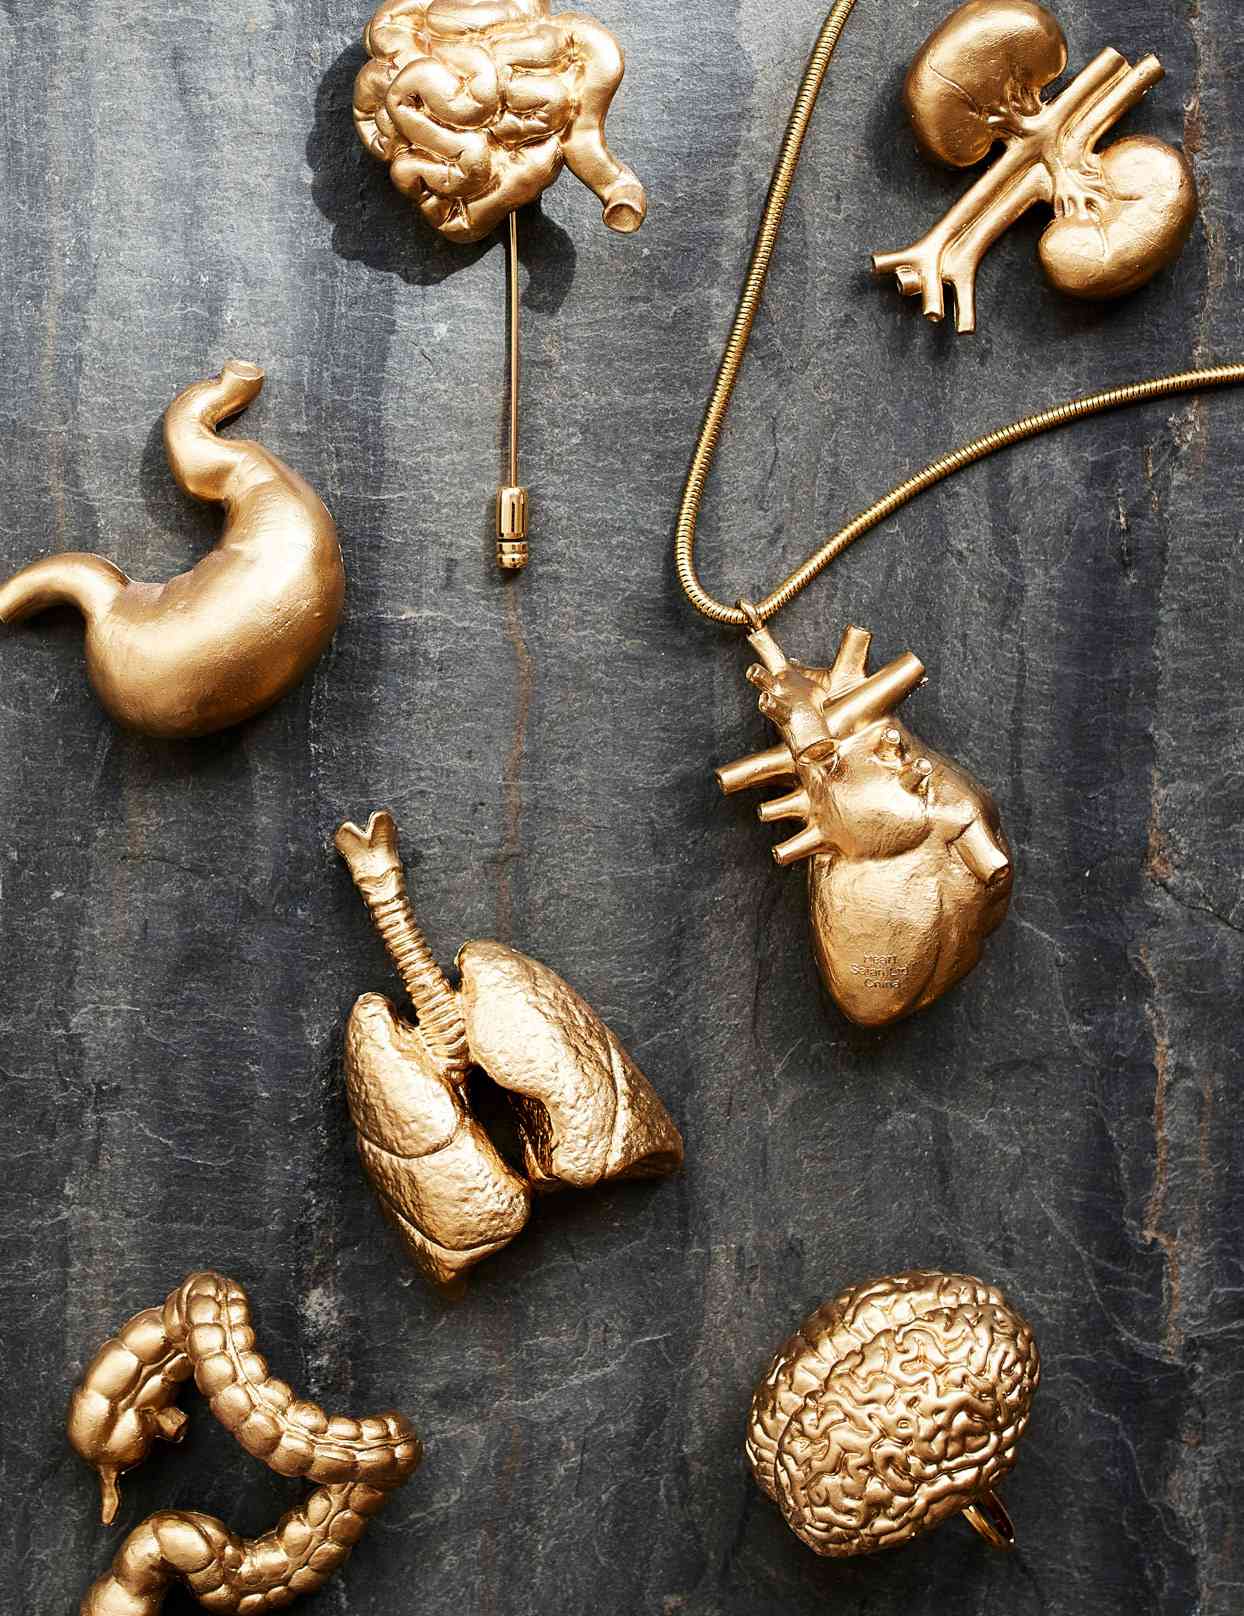 Gold spray-painted toy organs